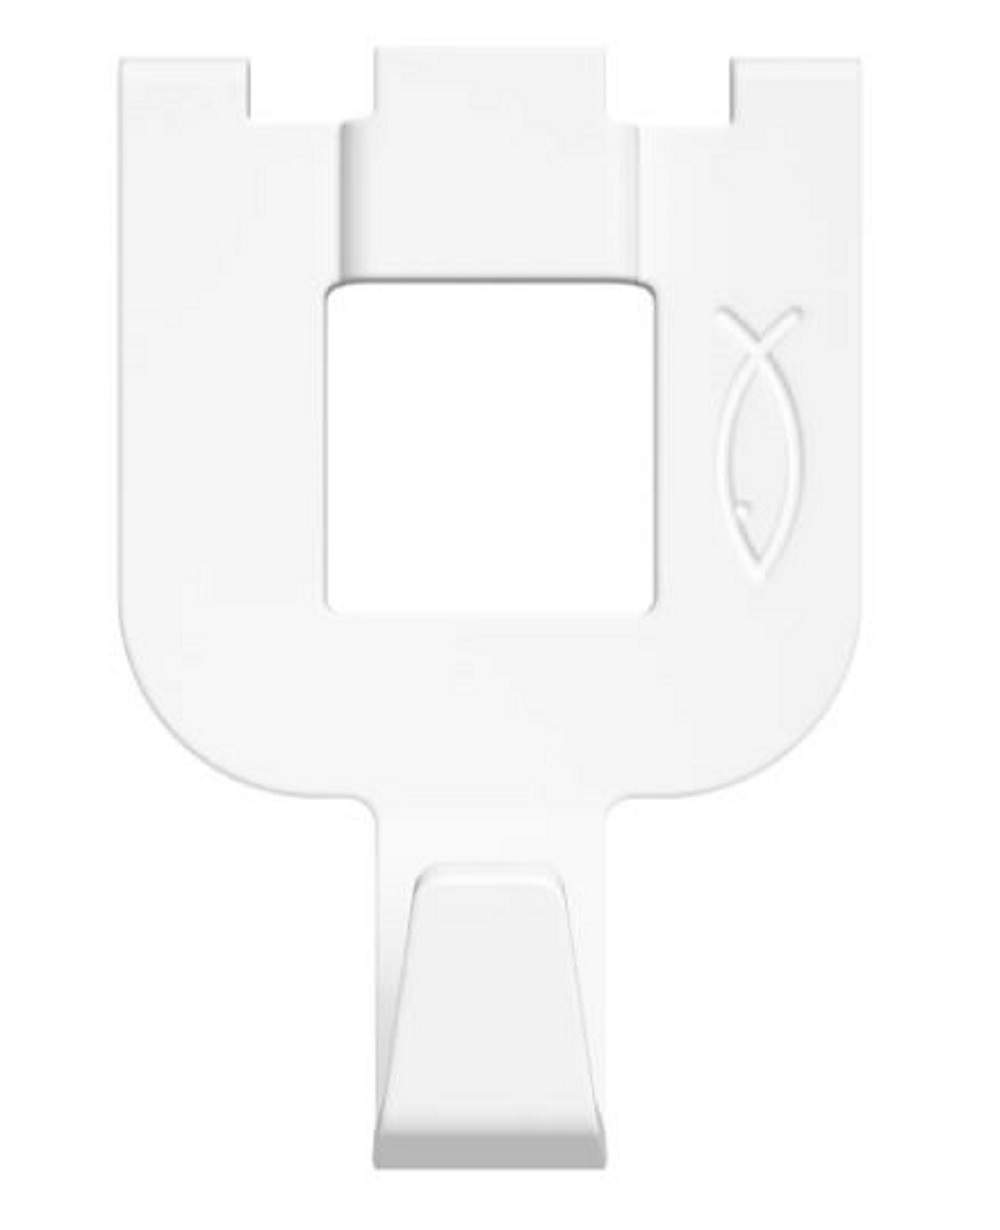 Fast & Fix wall hook, white, blister pack of 8 pieces